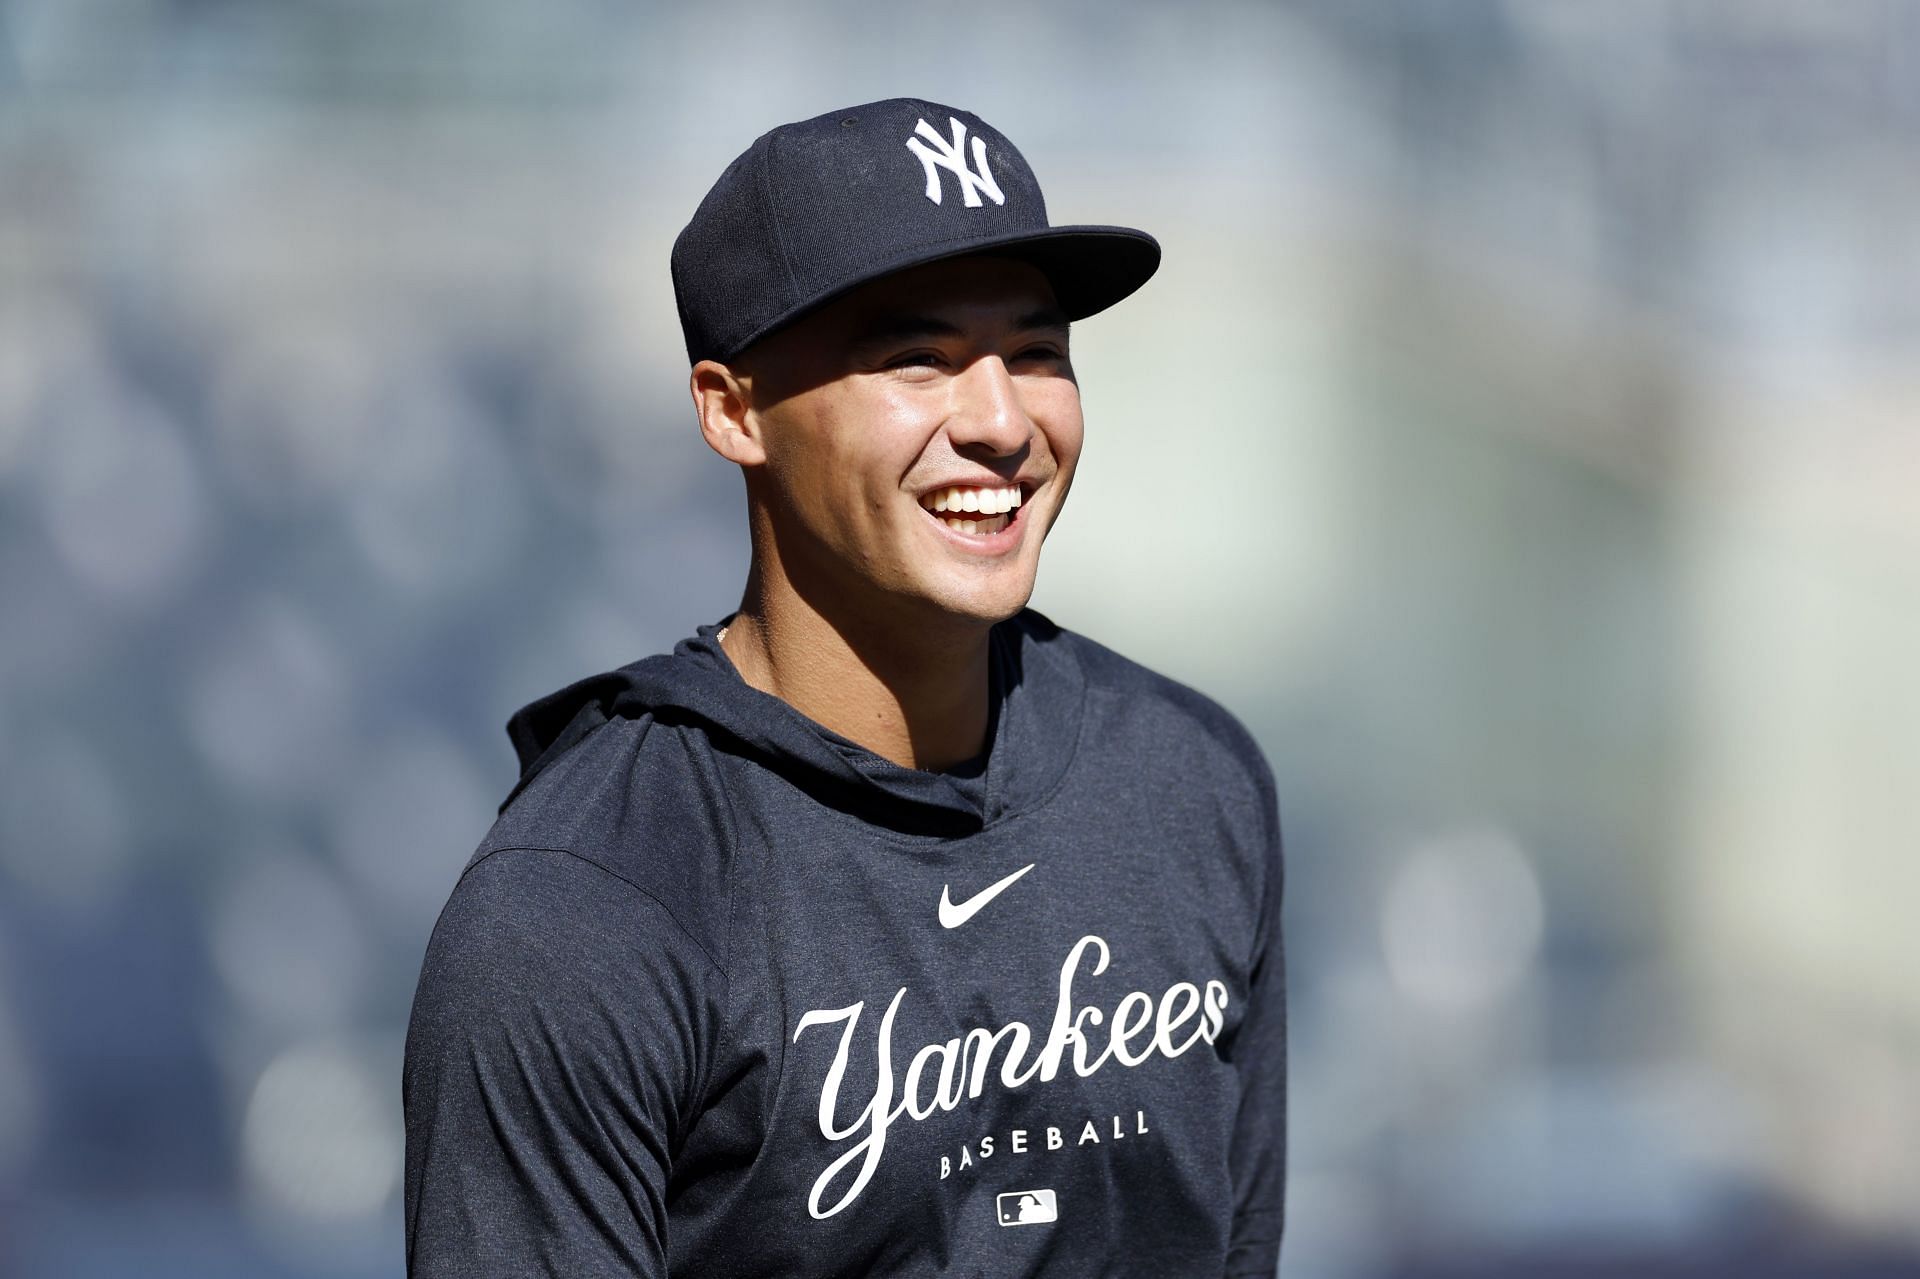 At 2 hours old, Yankees' Anthony Volpe was prepped for his destiny